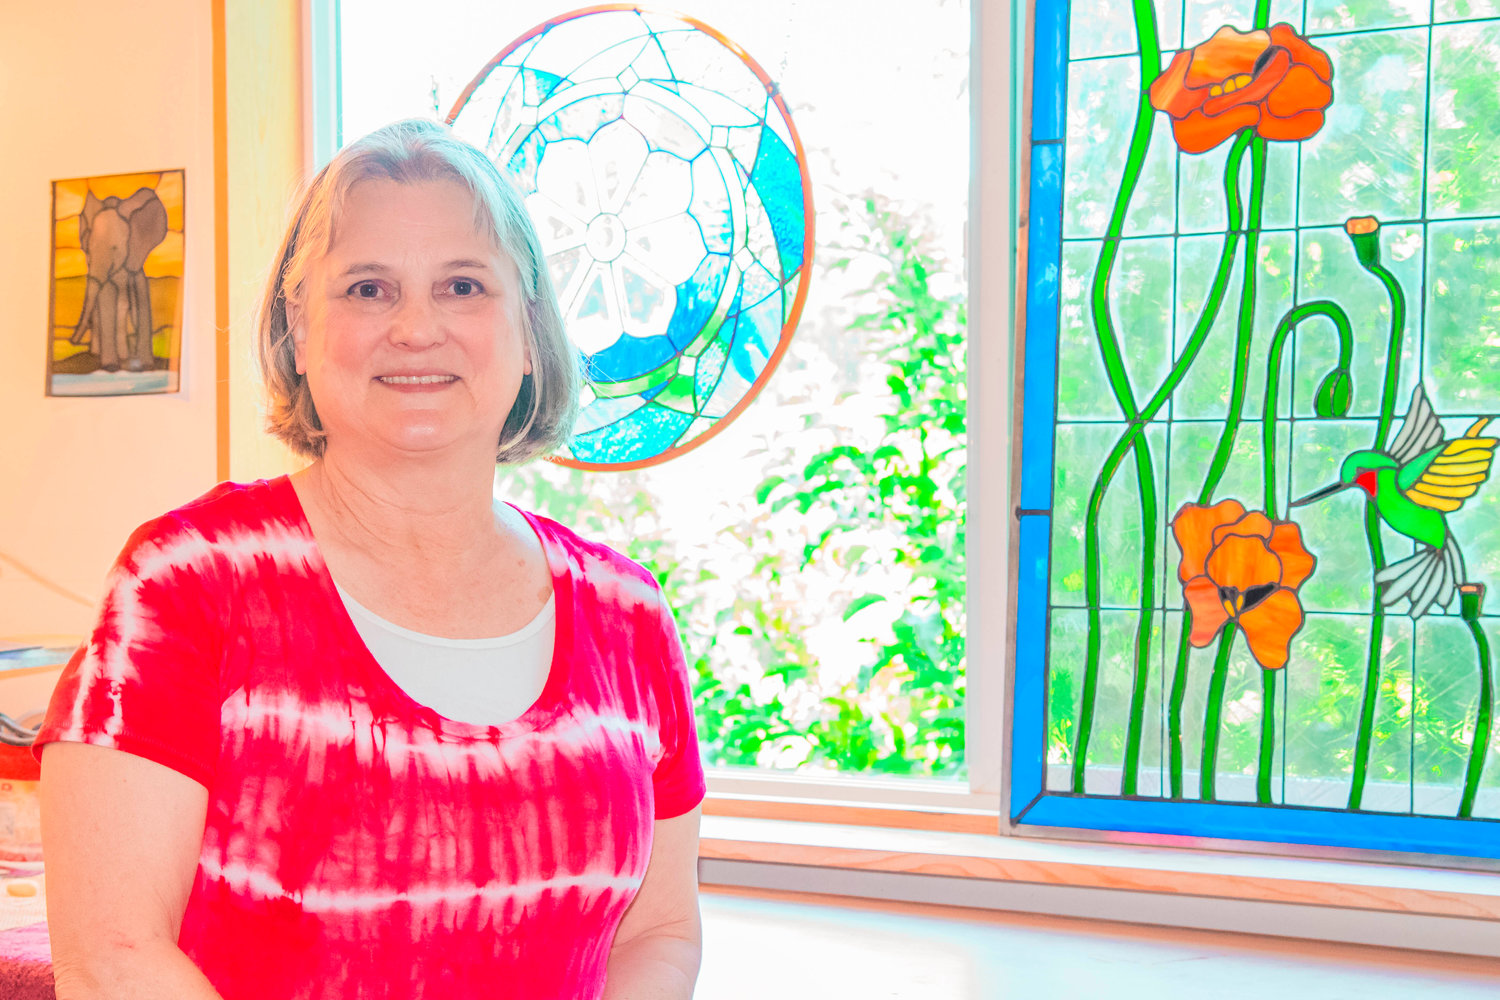 Marcy Anholt smiles and poses for a photo in front of stained glass in her studio.